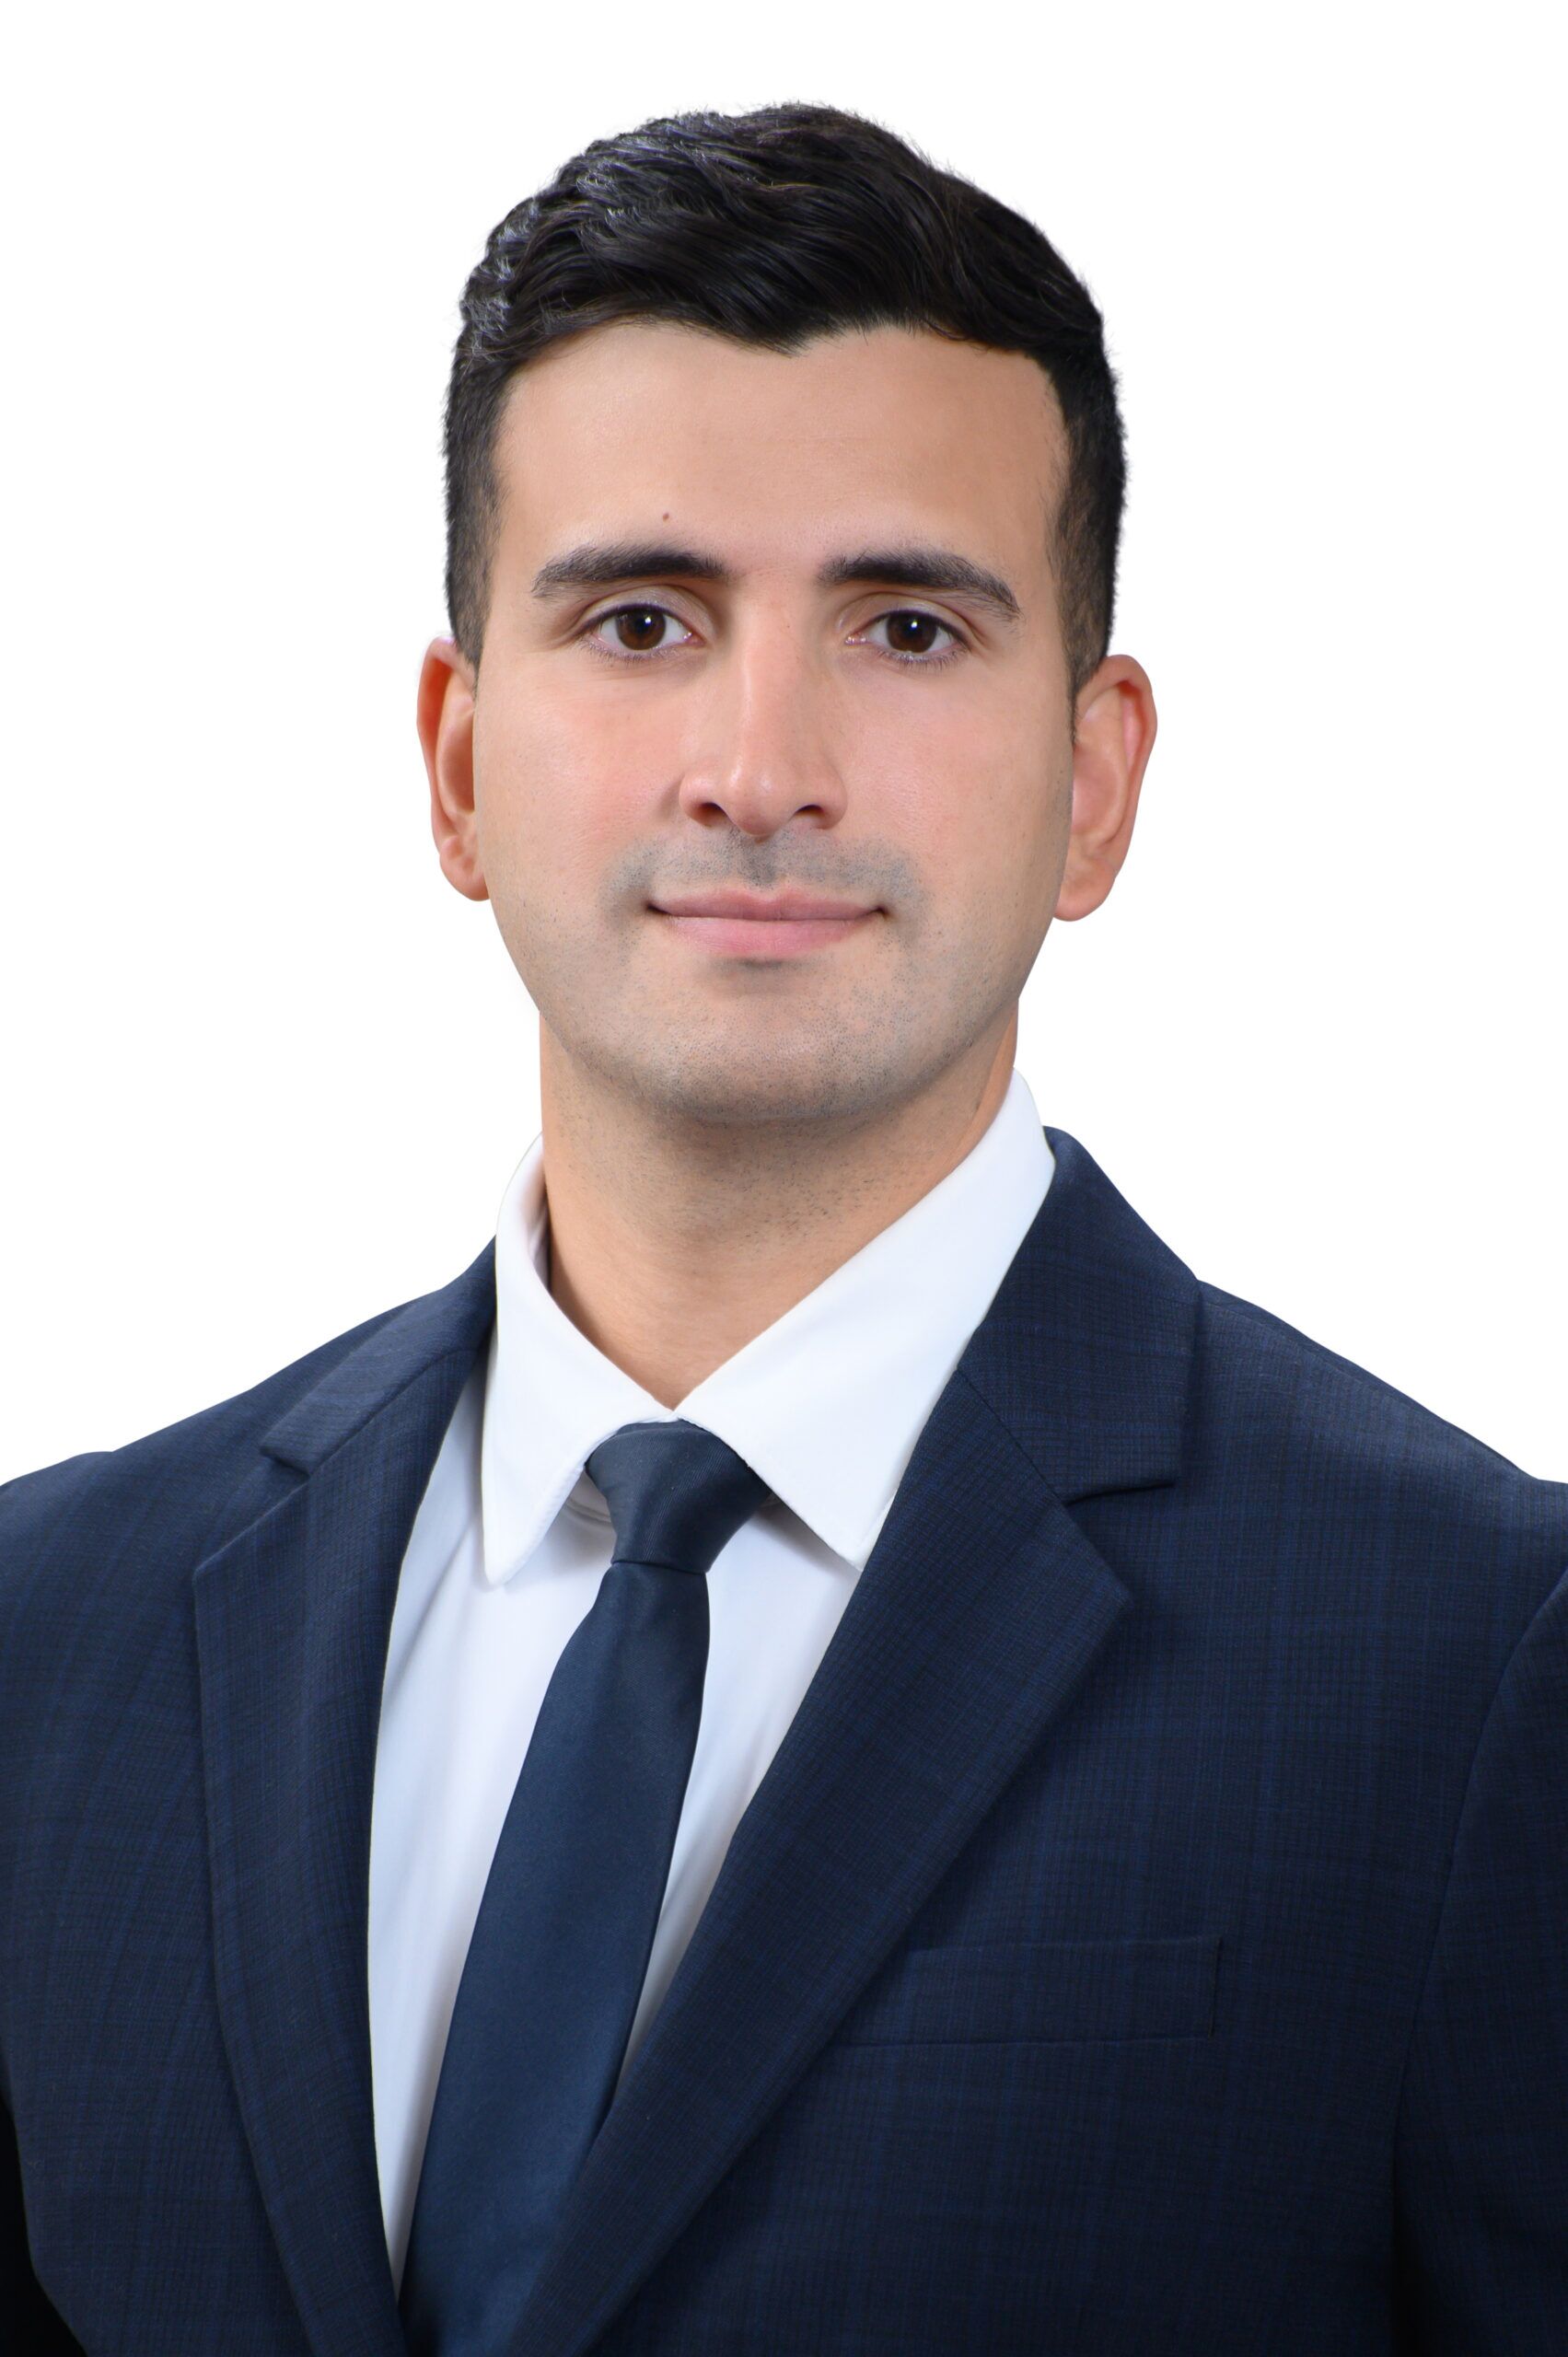 Matias Cordoba presently serves as a litigation attorney at Hancock Injury Attorneys, focusing on representing individuals in need. Outside of his legal endeavors, he indulges in his interests, including watching sports, engaging in exercise, and exploring new culinary experiences.